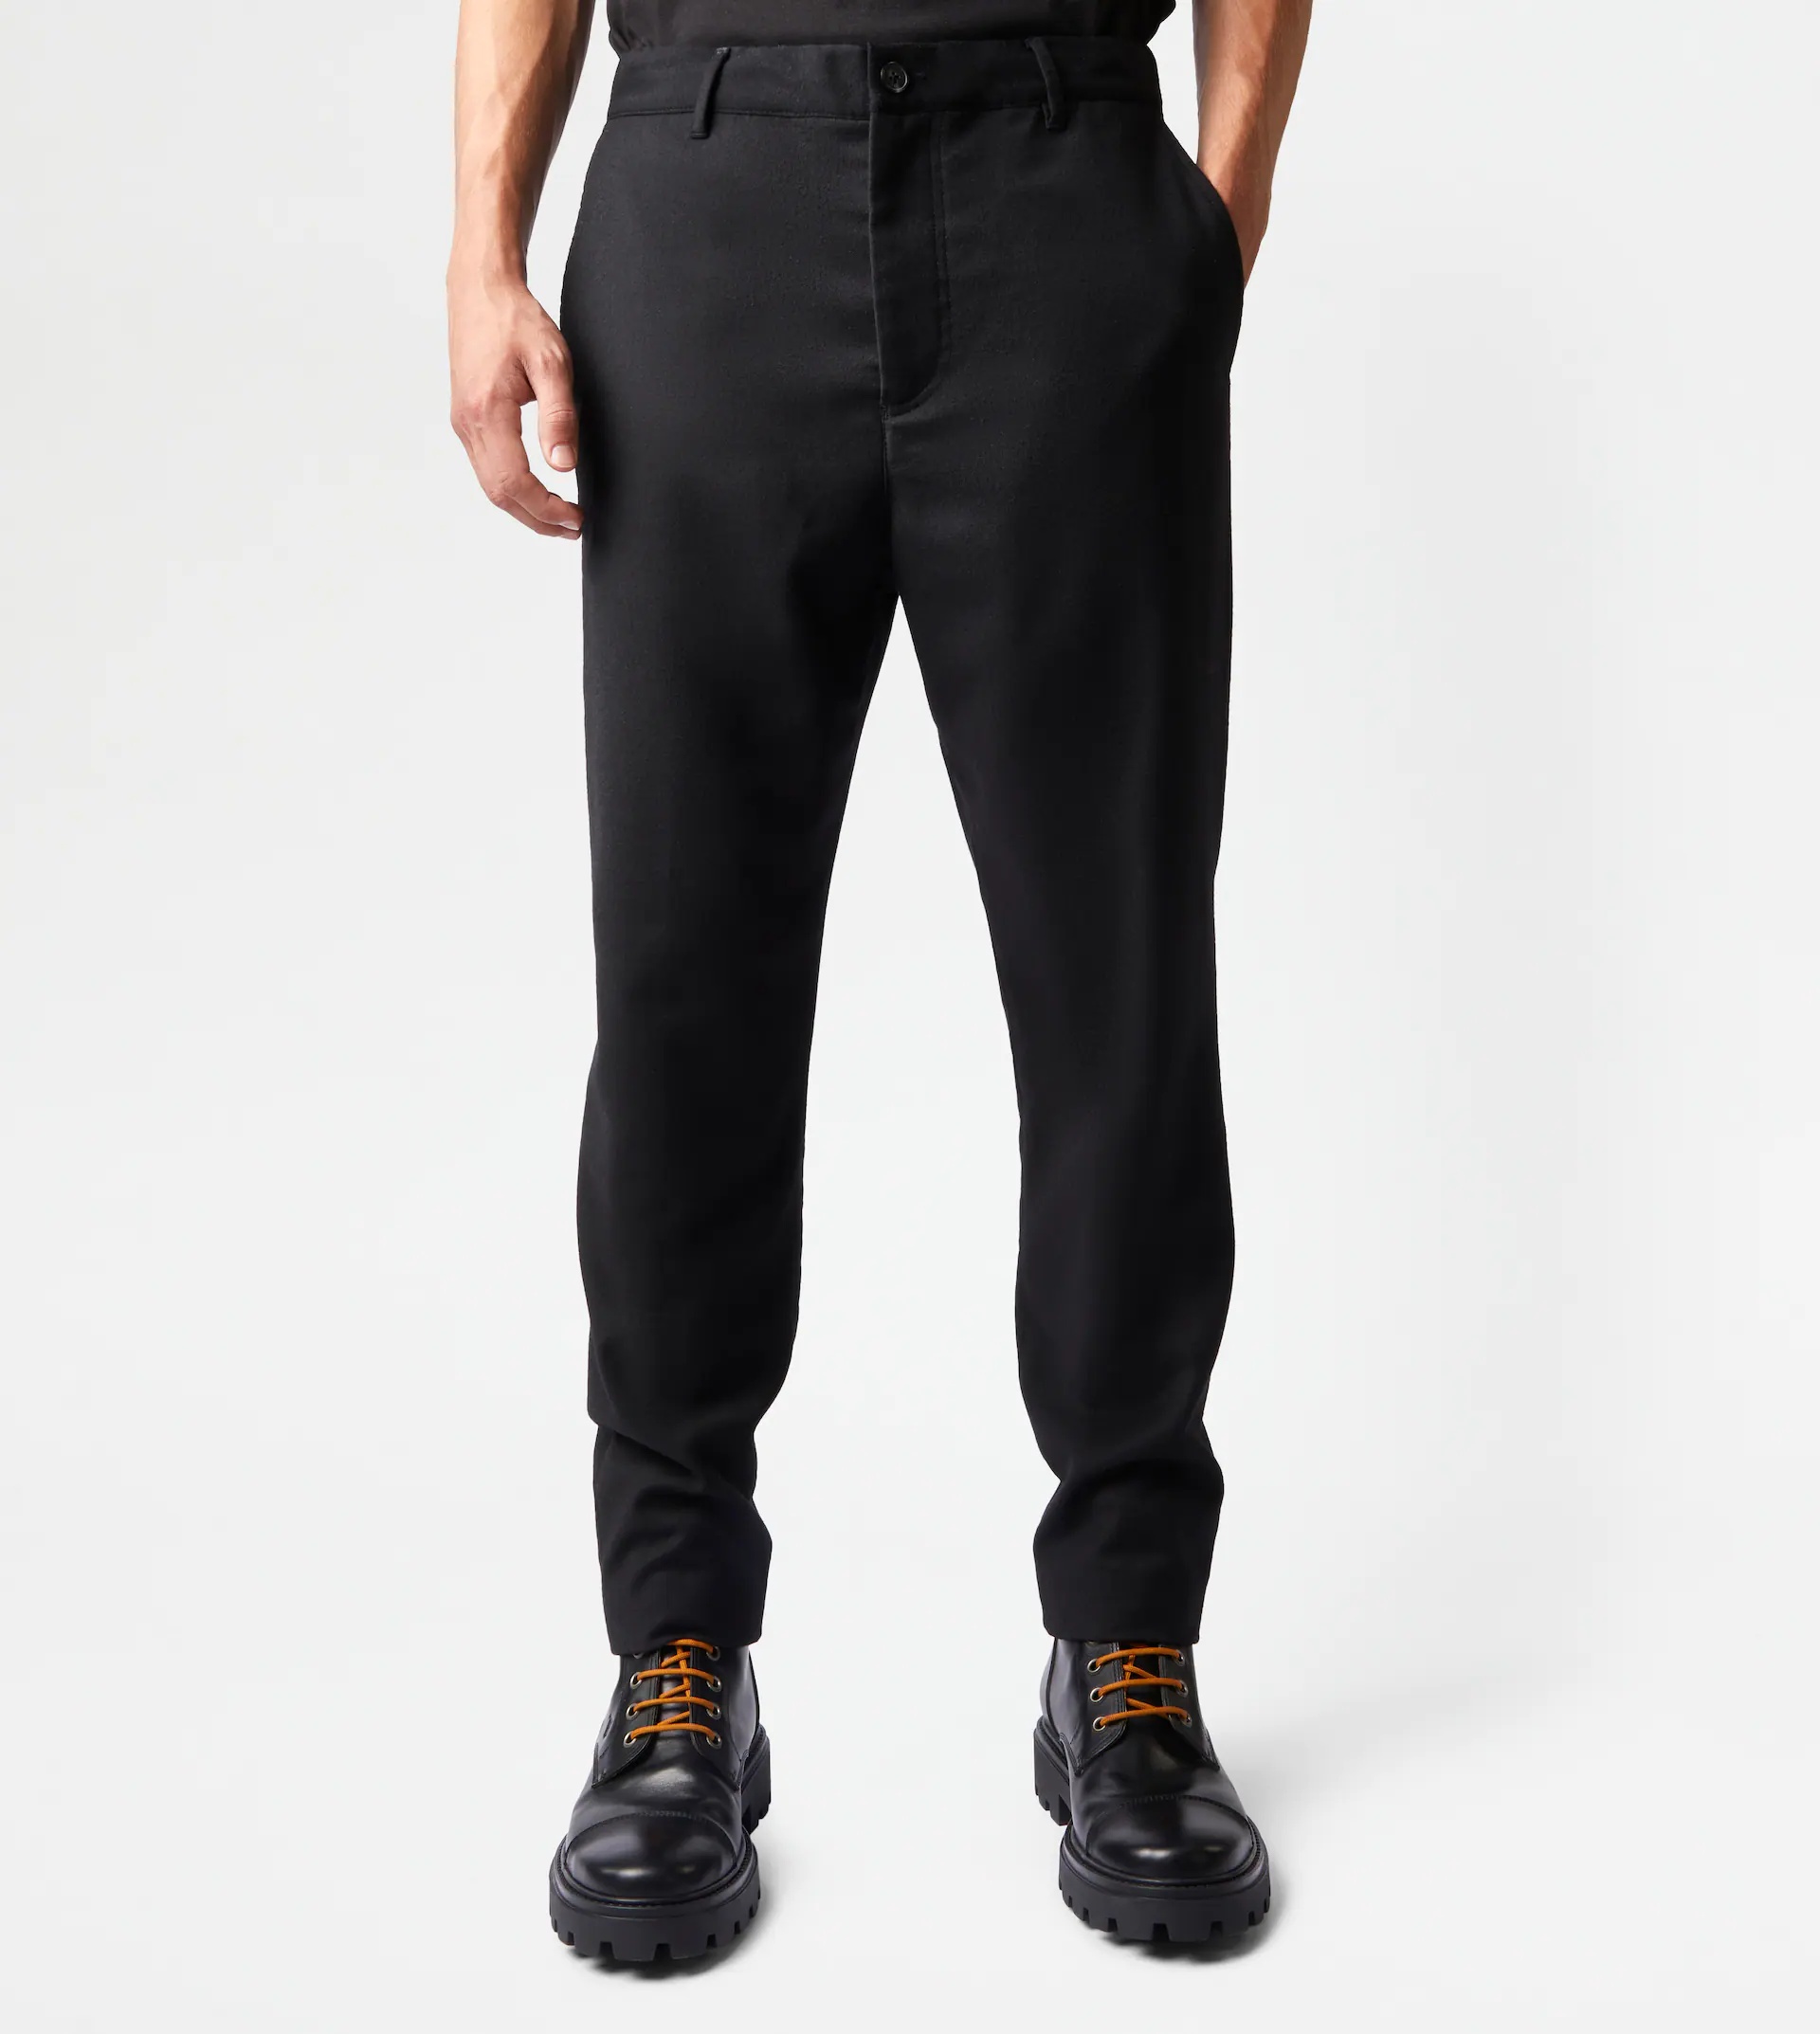 TOD'S CHINO TROUSERS ADJUSTABLE WAISTBAND - BLACK - 7